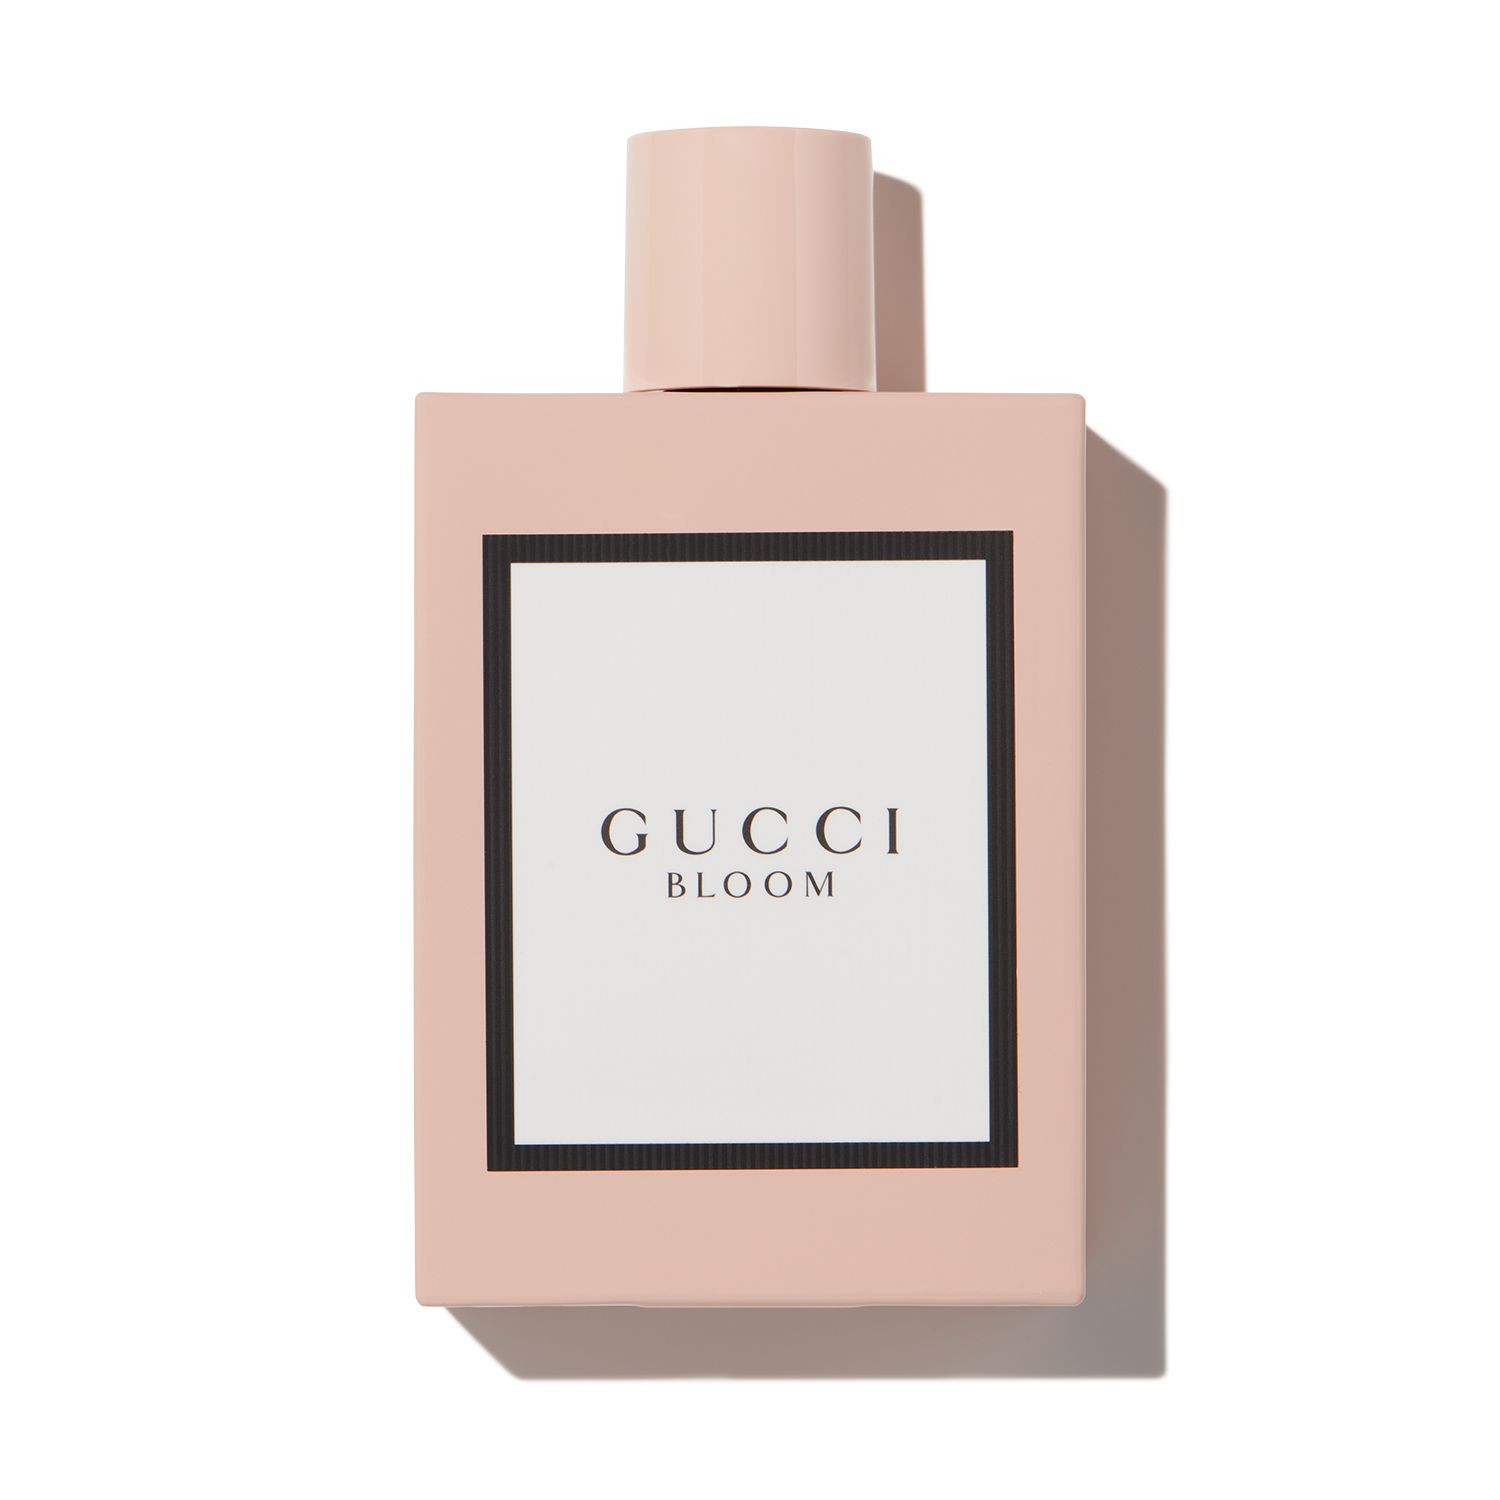 Gucci Bloom Intense: The New Sensual Fragrance